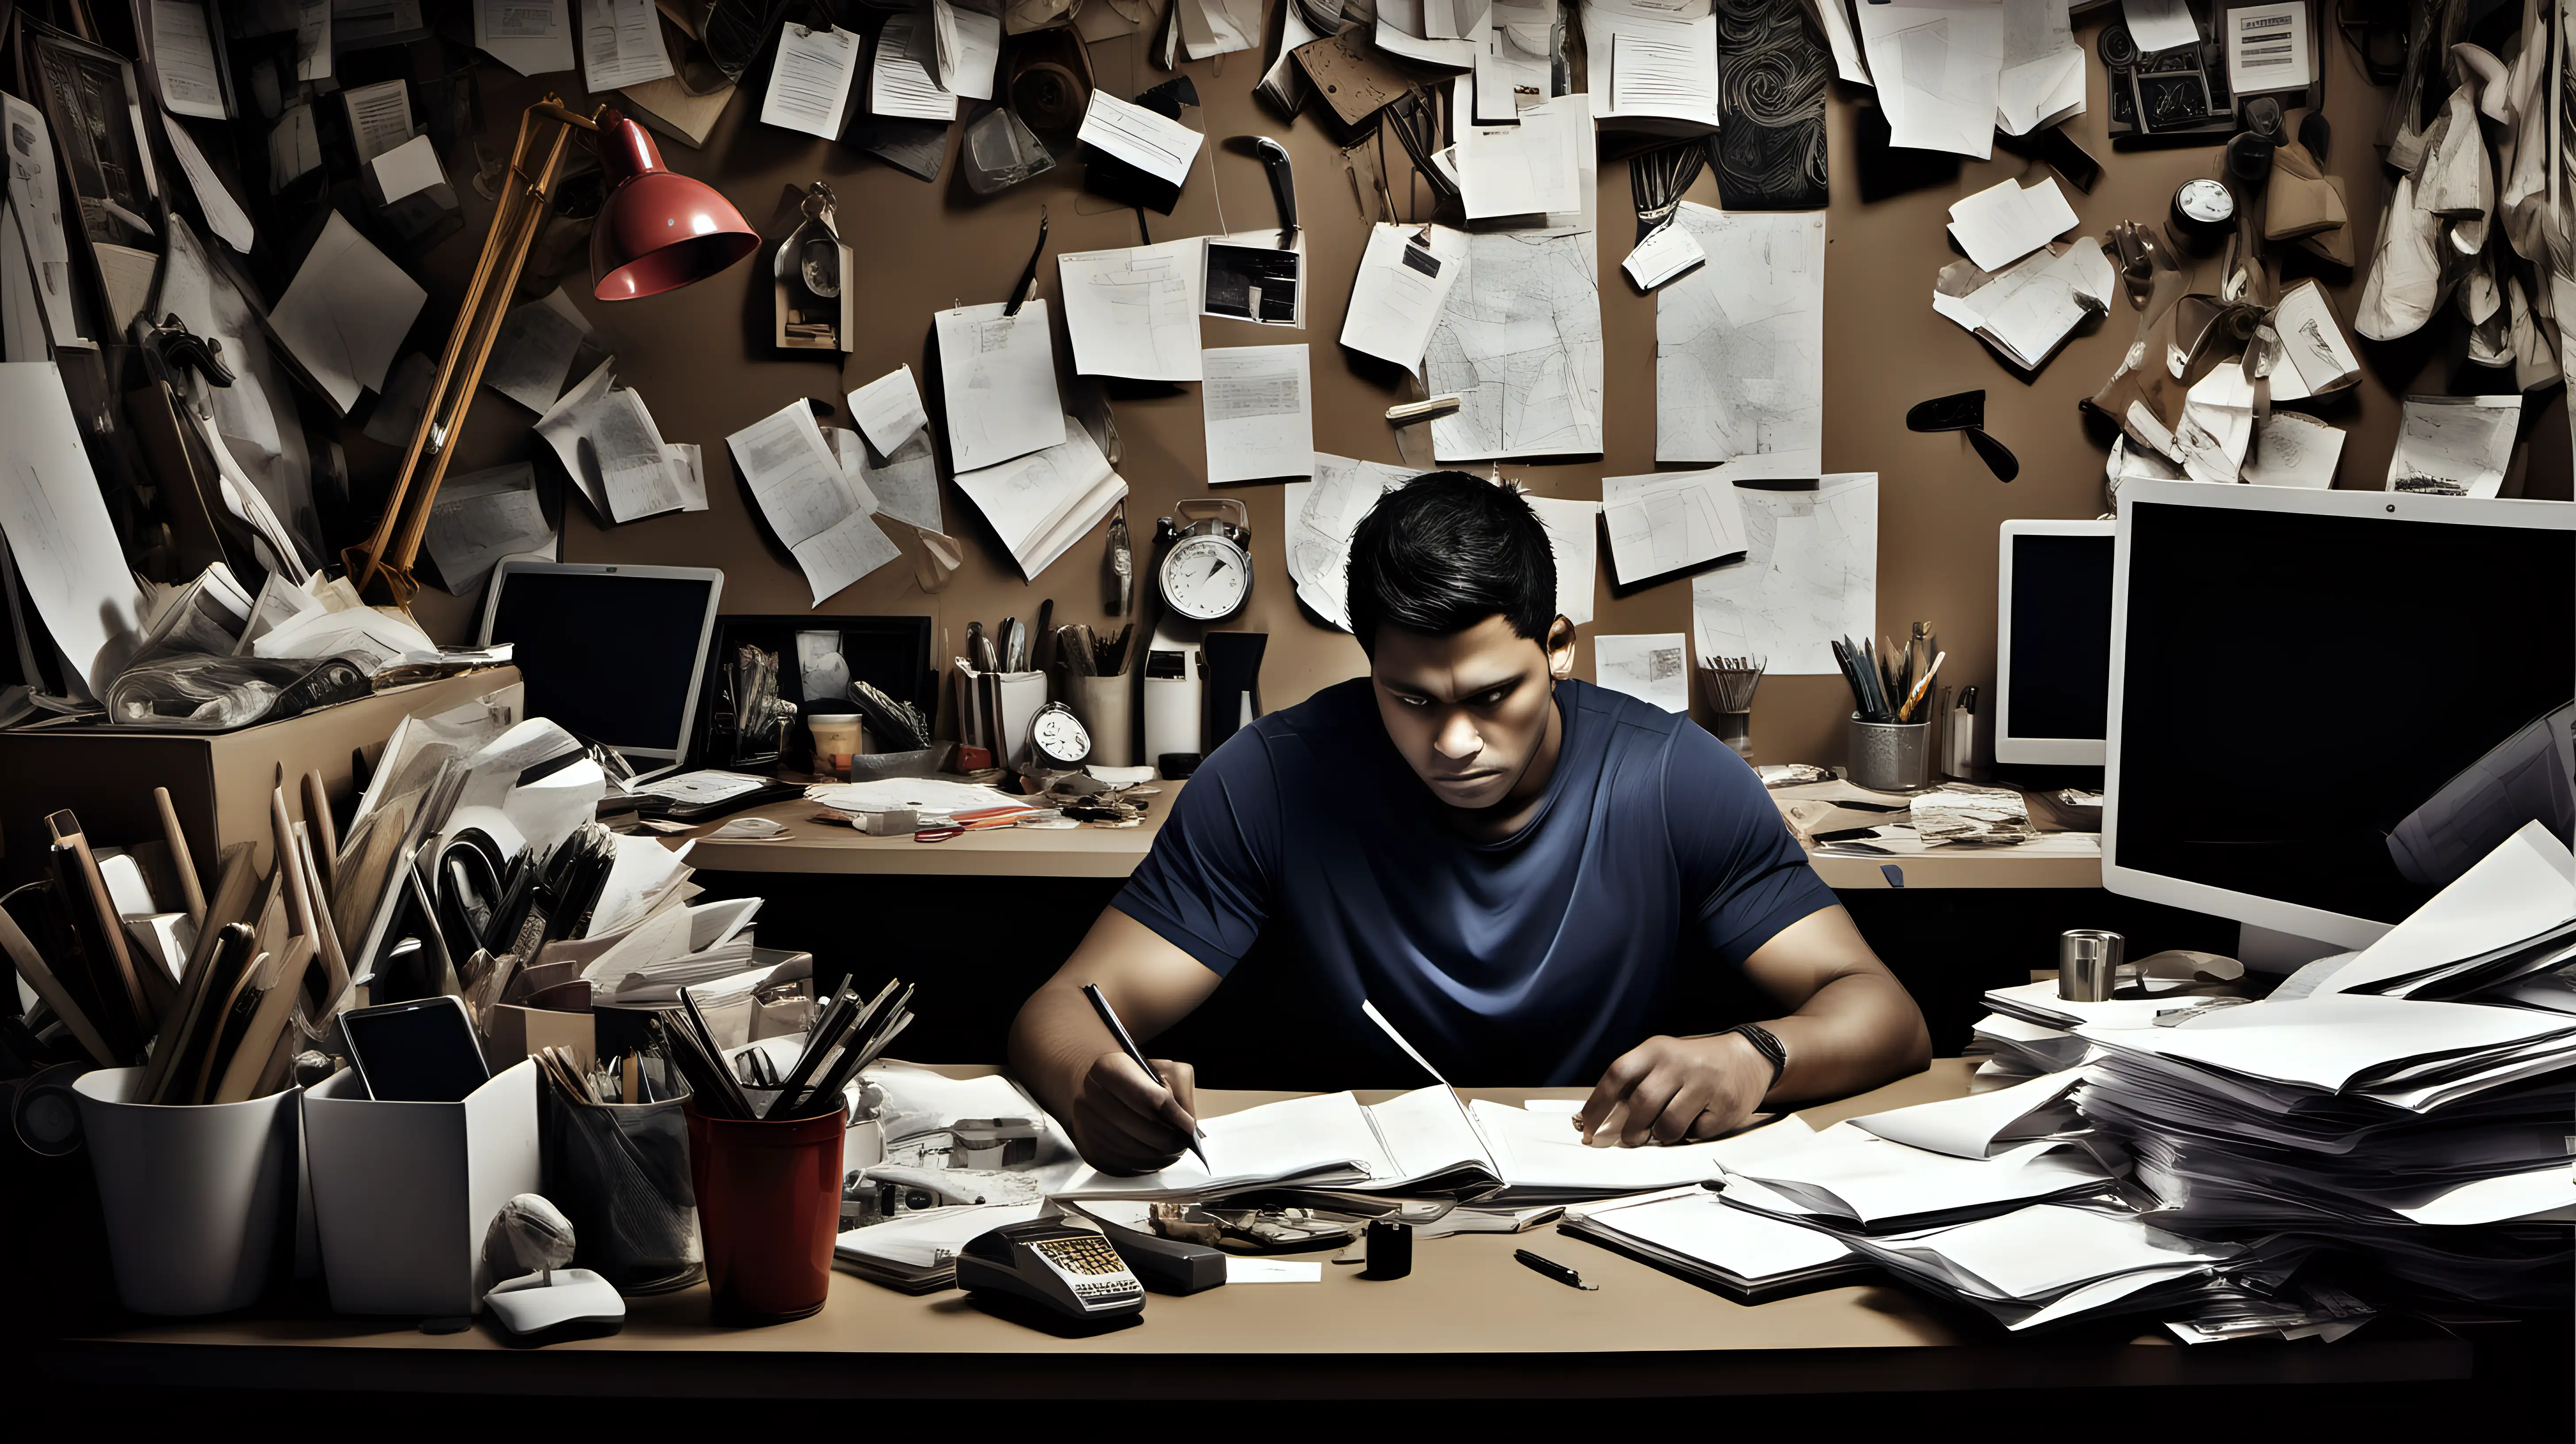 Determined Professional Amidst Cluttered Workspace Striving for Success